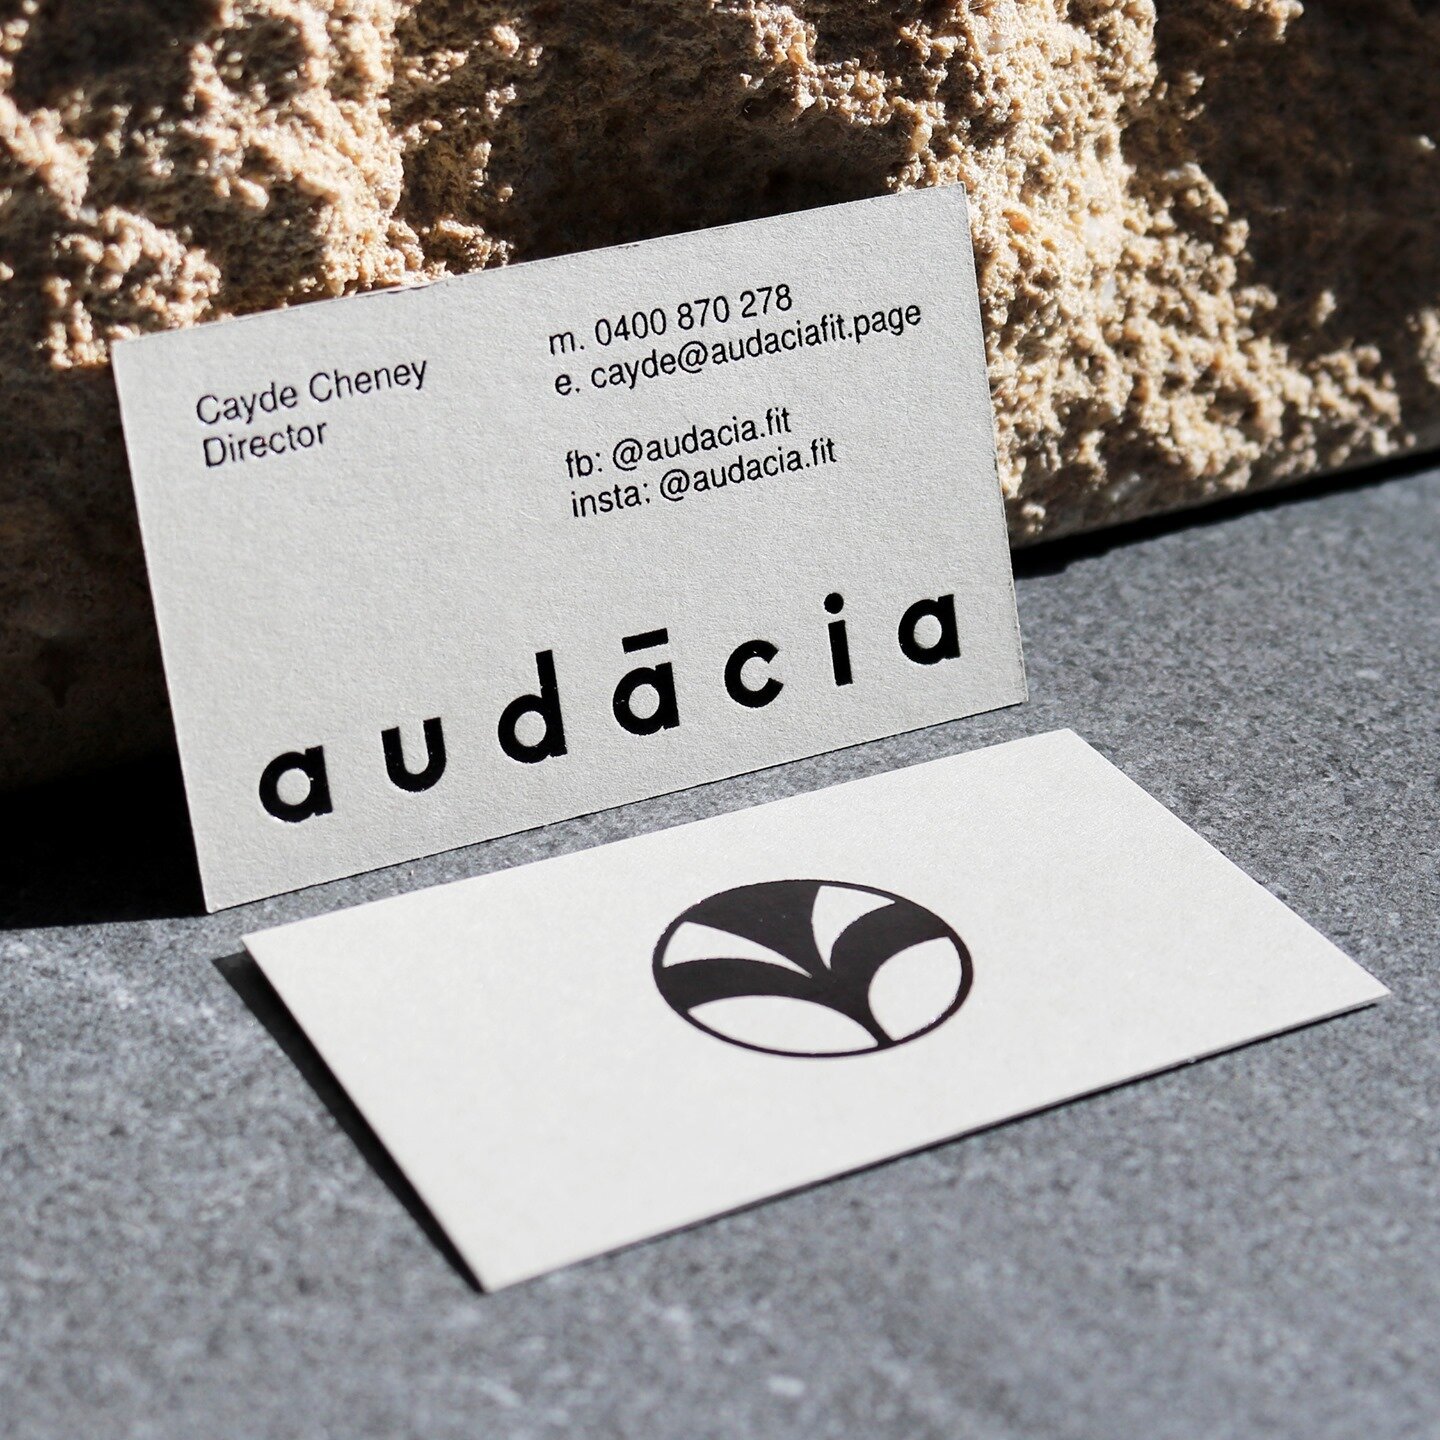 Clean and bold but natural business cards for @audacia.fit⁠
Grey textured card with gloss black foil. whats not to love?⁠
.⁠
.⁠
.⁠
Photography: @another_studio_ / @mariemacg⁠
Print Production: @stitch_press⁠
Paper: @spiceraus⁠
⁠
#collateral #print #b